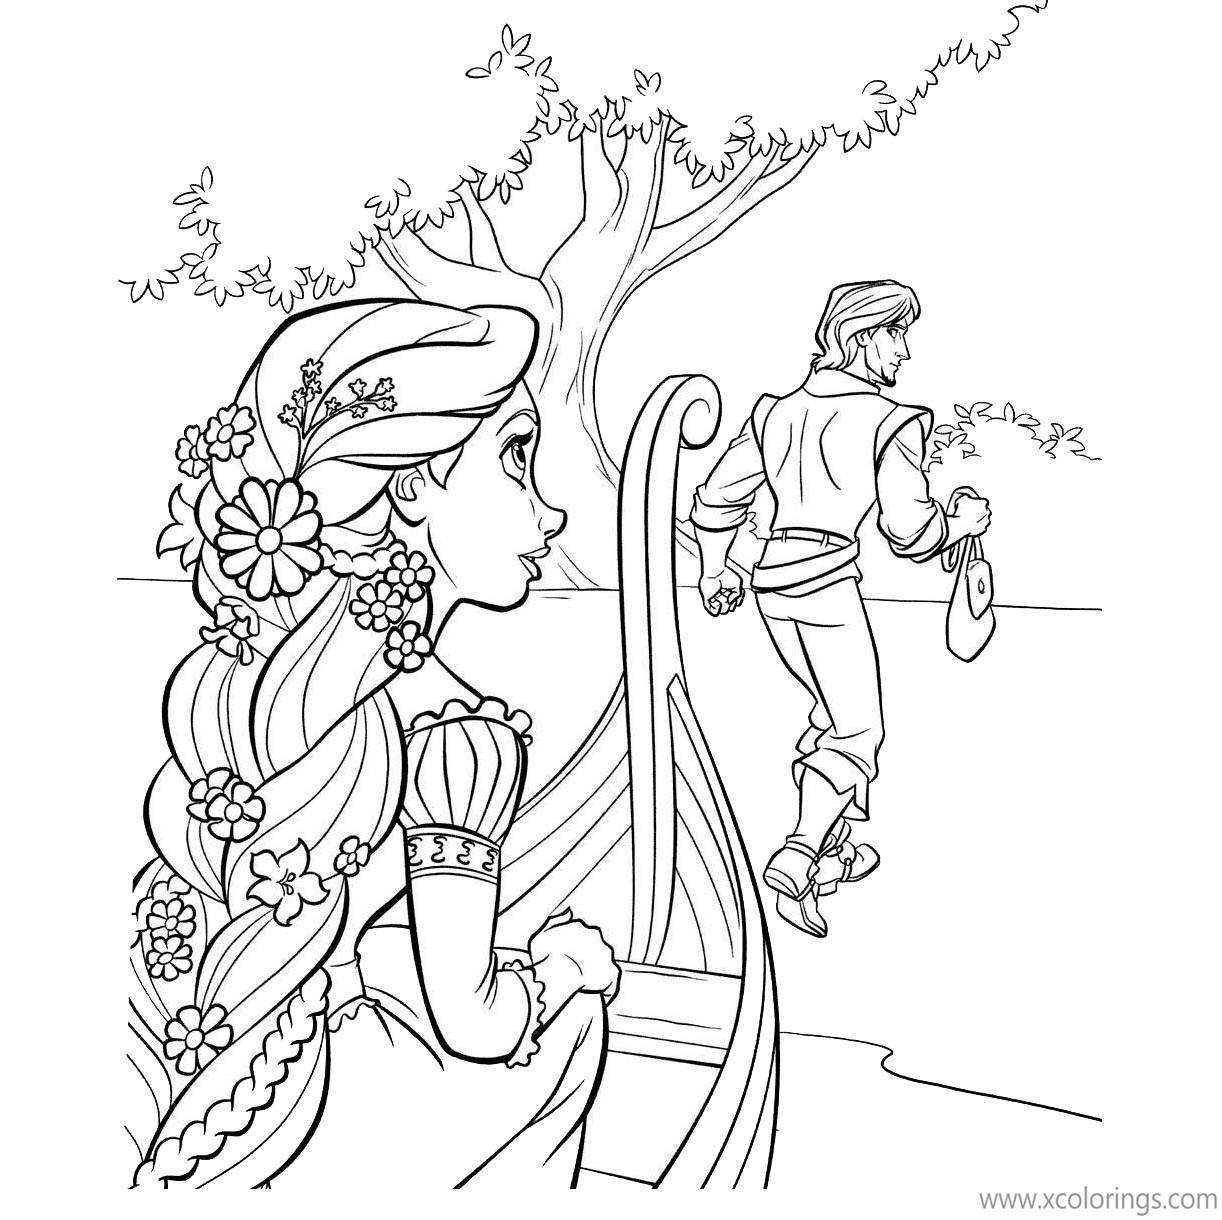 Free Rapunzel Coloring Pages Flynn Got Off the Boat printable